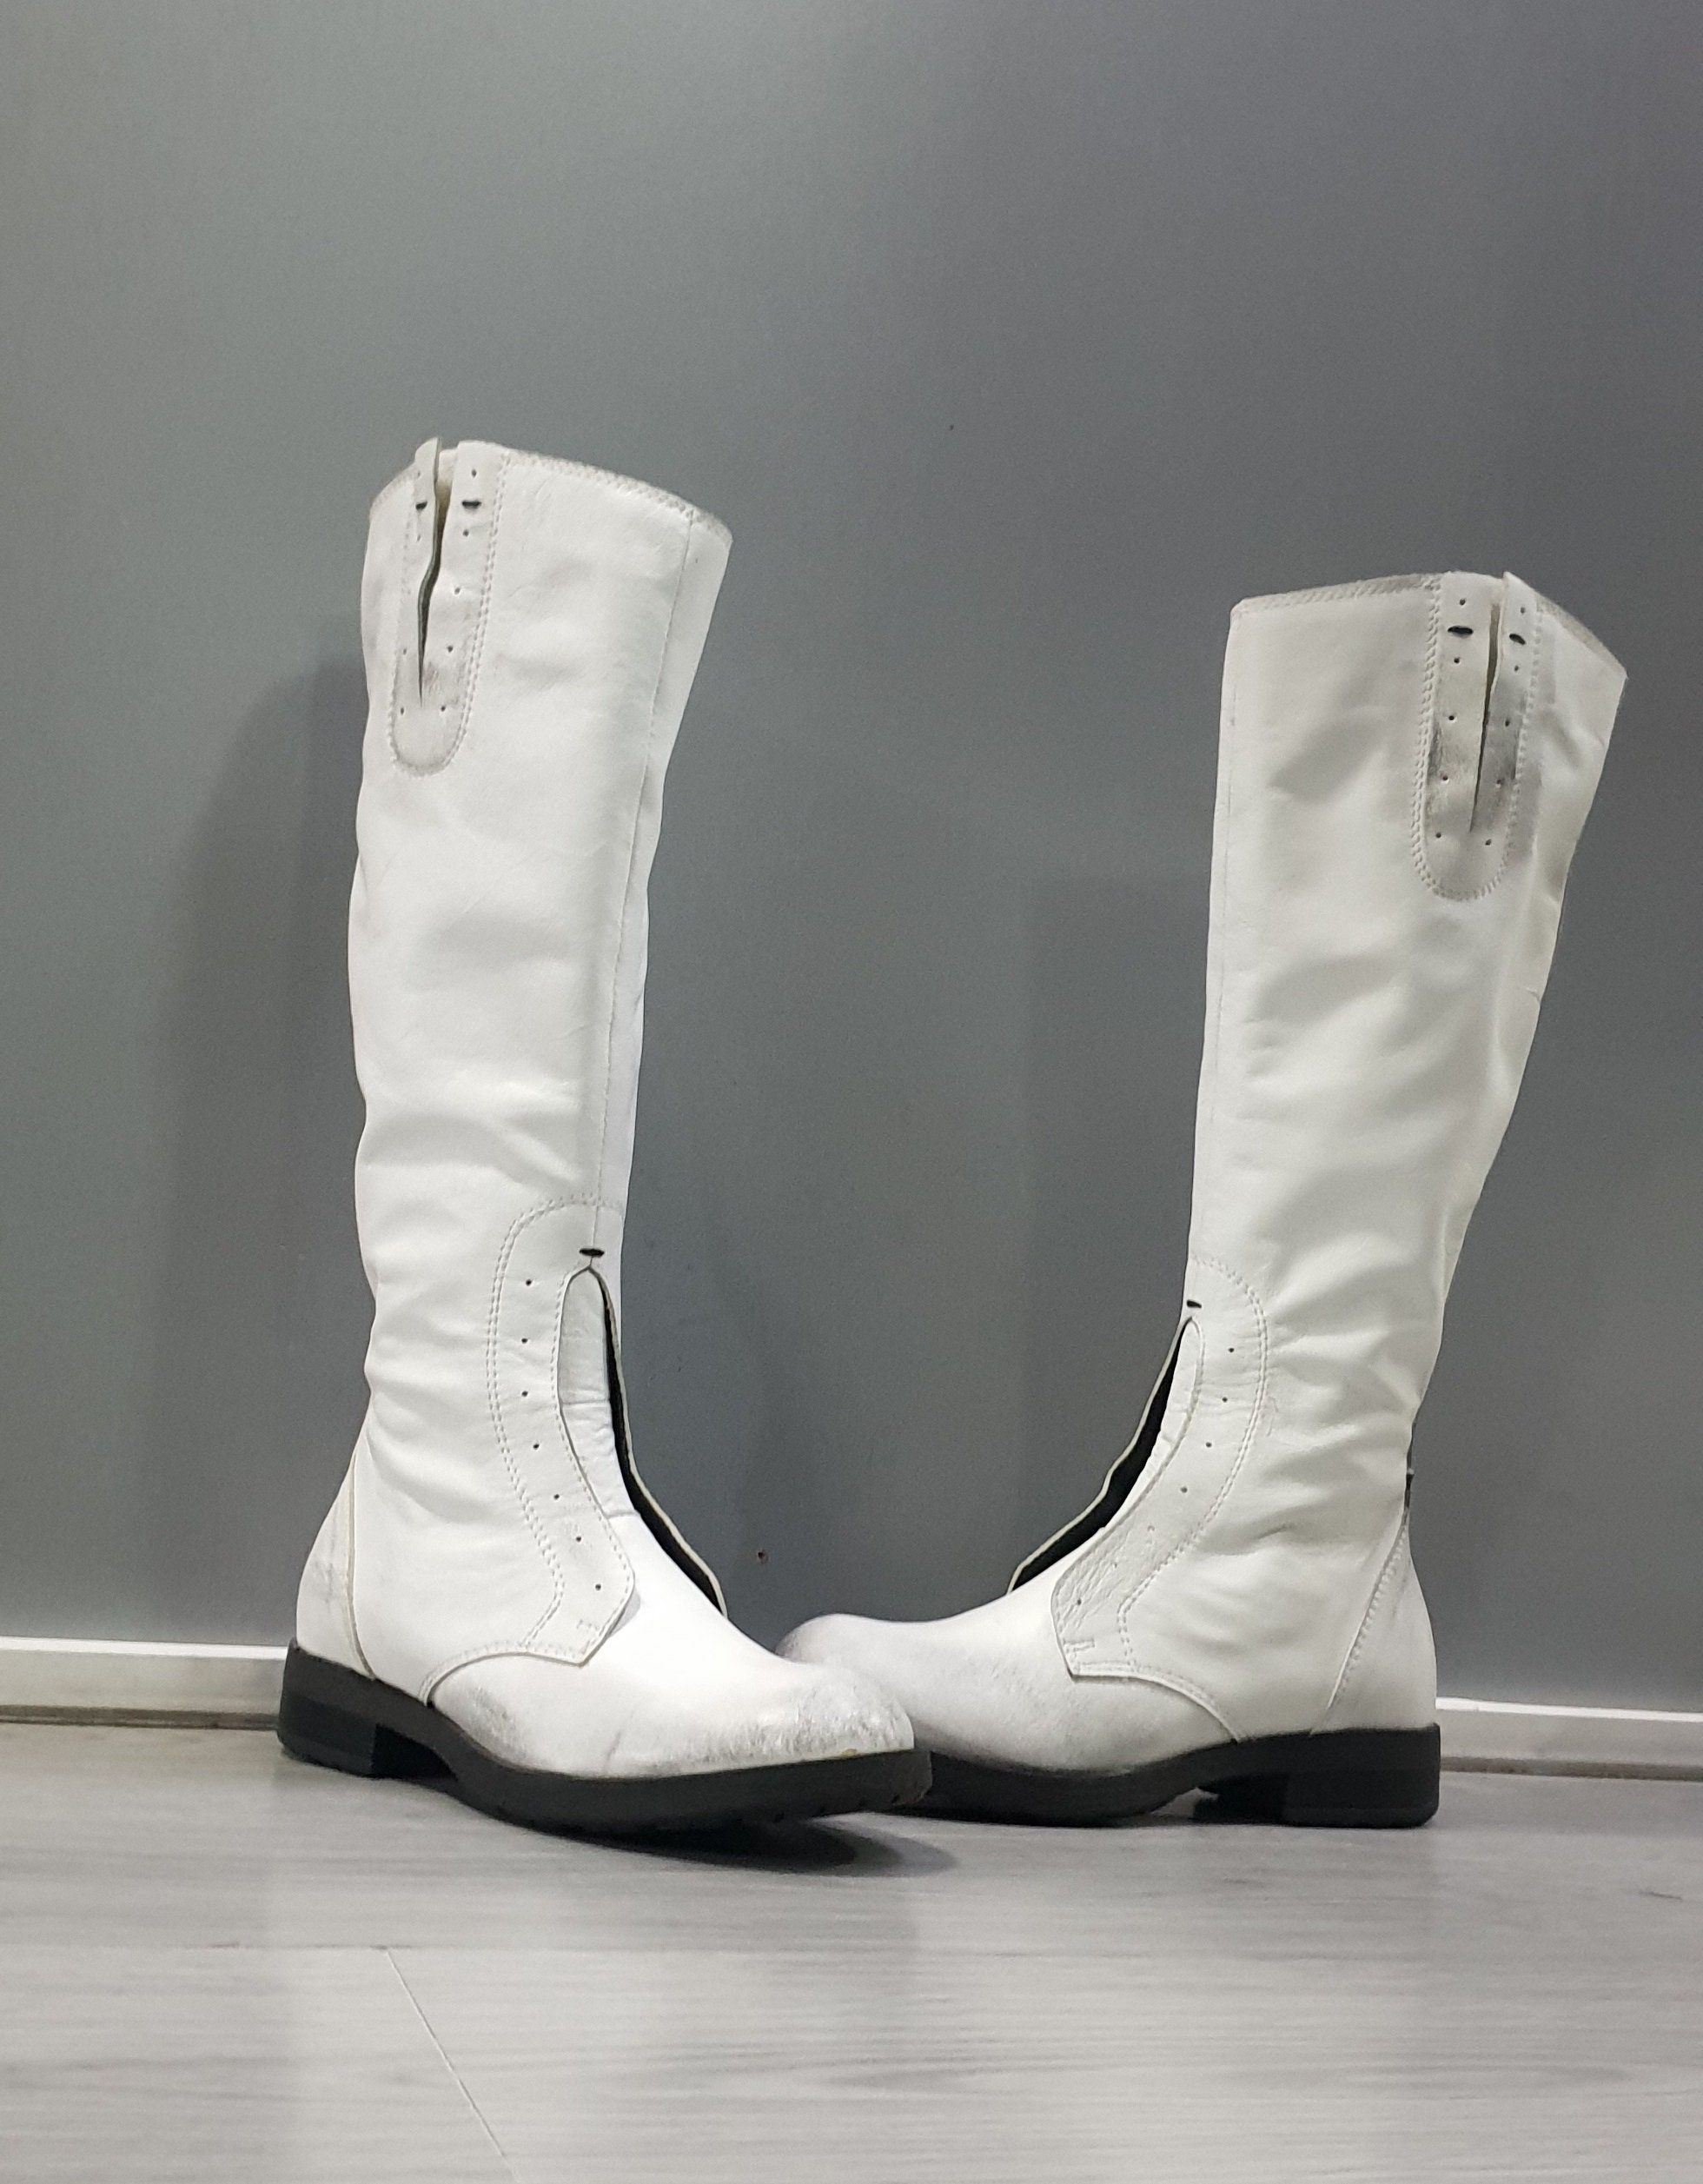 Winter Boots, White Boots, Flat Boots, Leather Boots, High Ankle